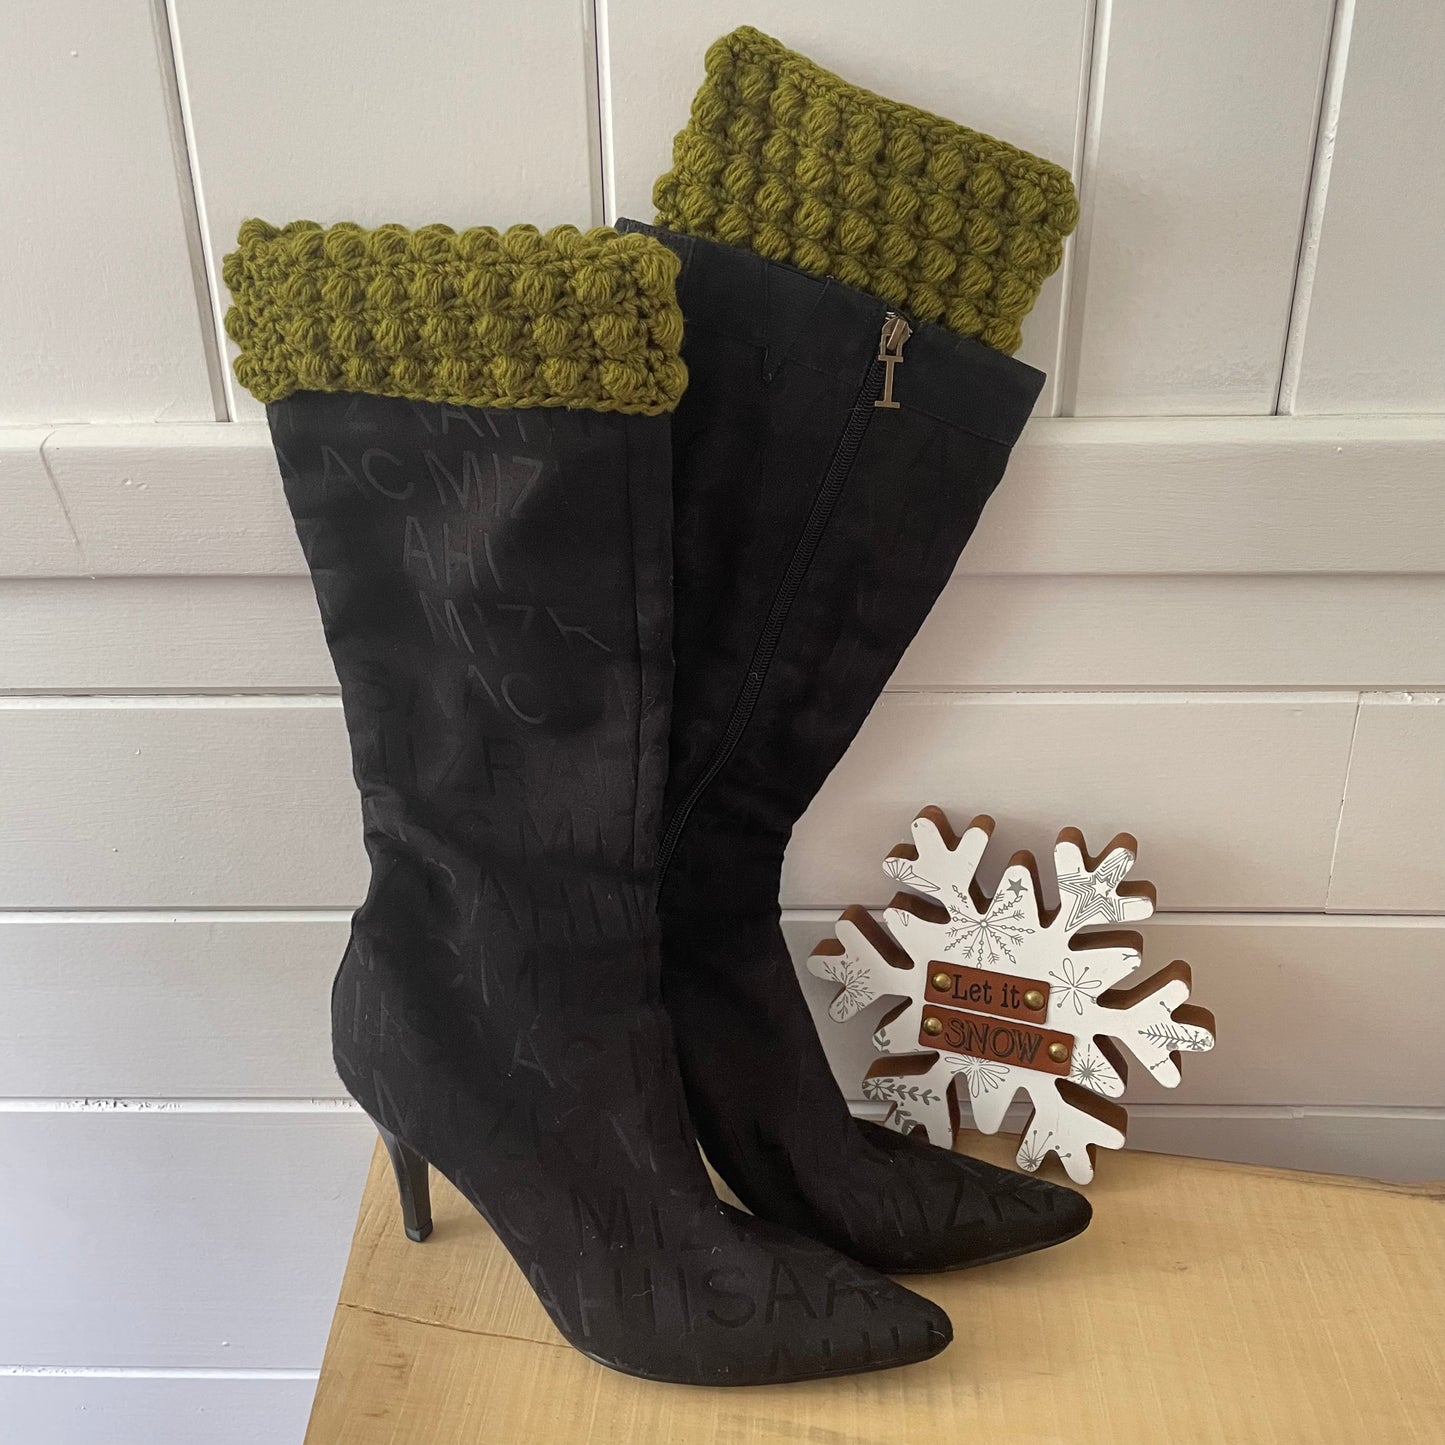 Boot Cuffs in Olive Green Puff Stitch 12" Hand Crocheted Knit Fall Winter Hiking Indoor Outdoor Cozy